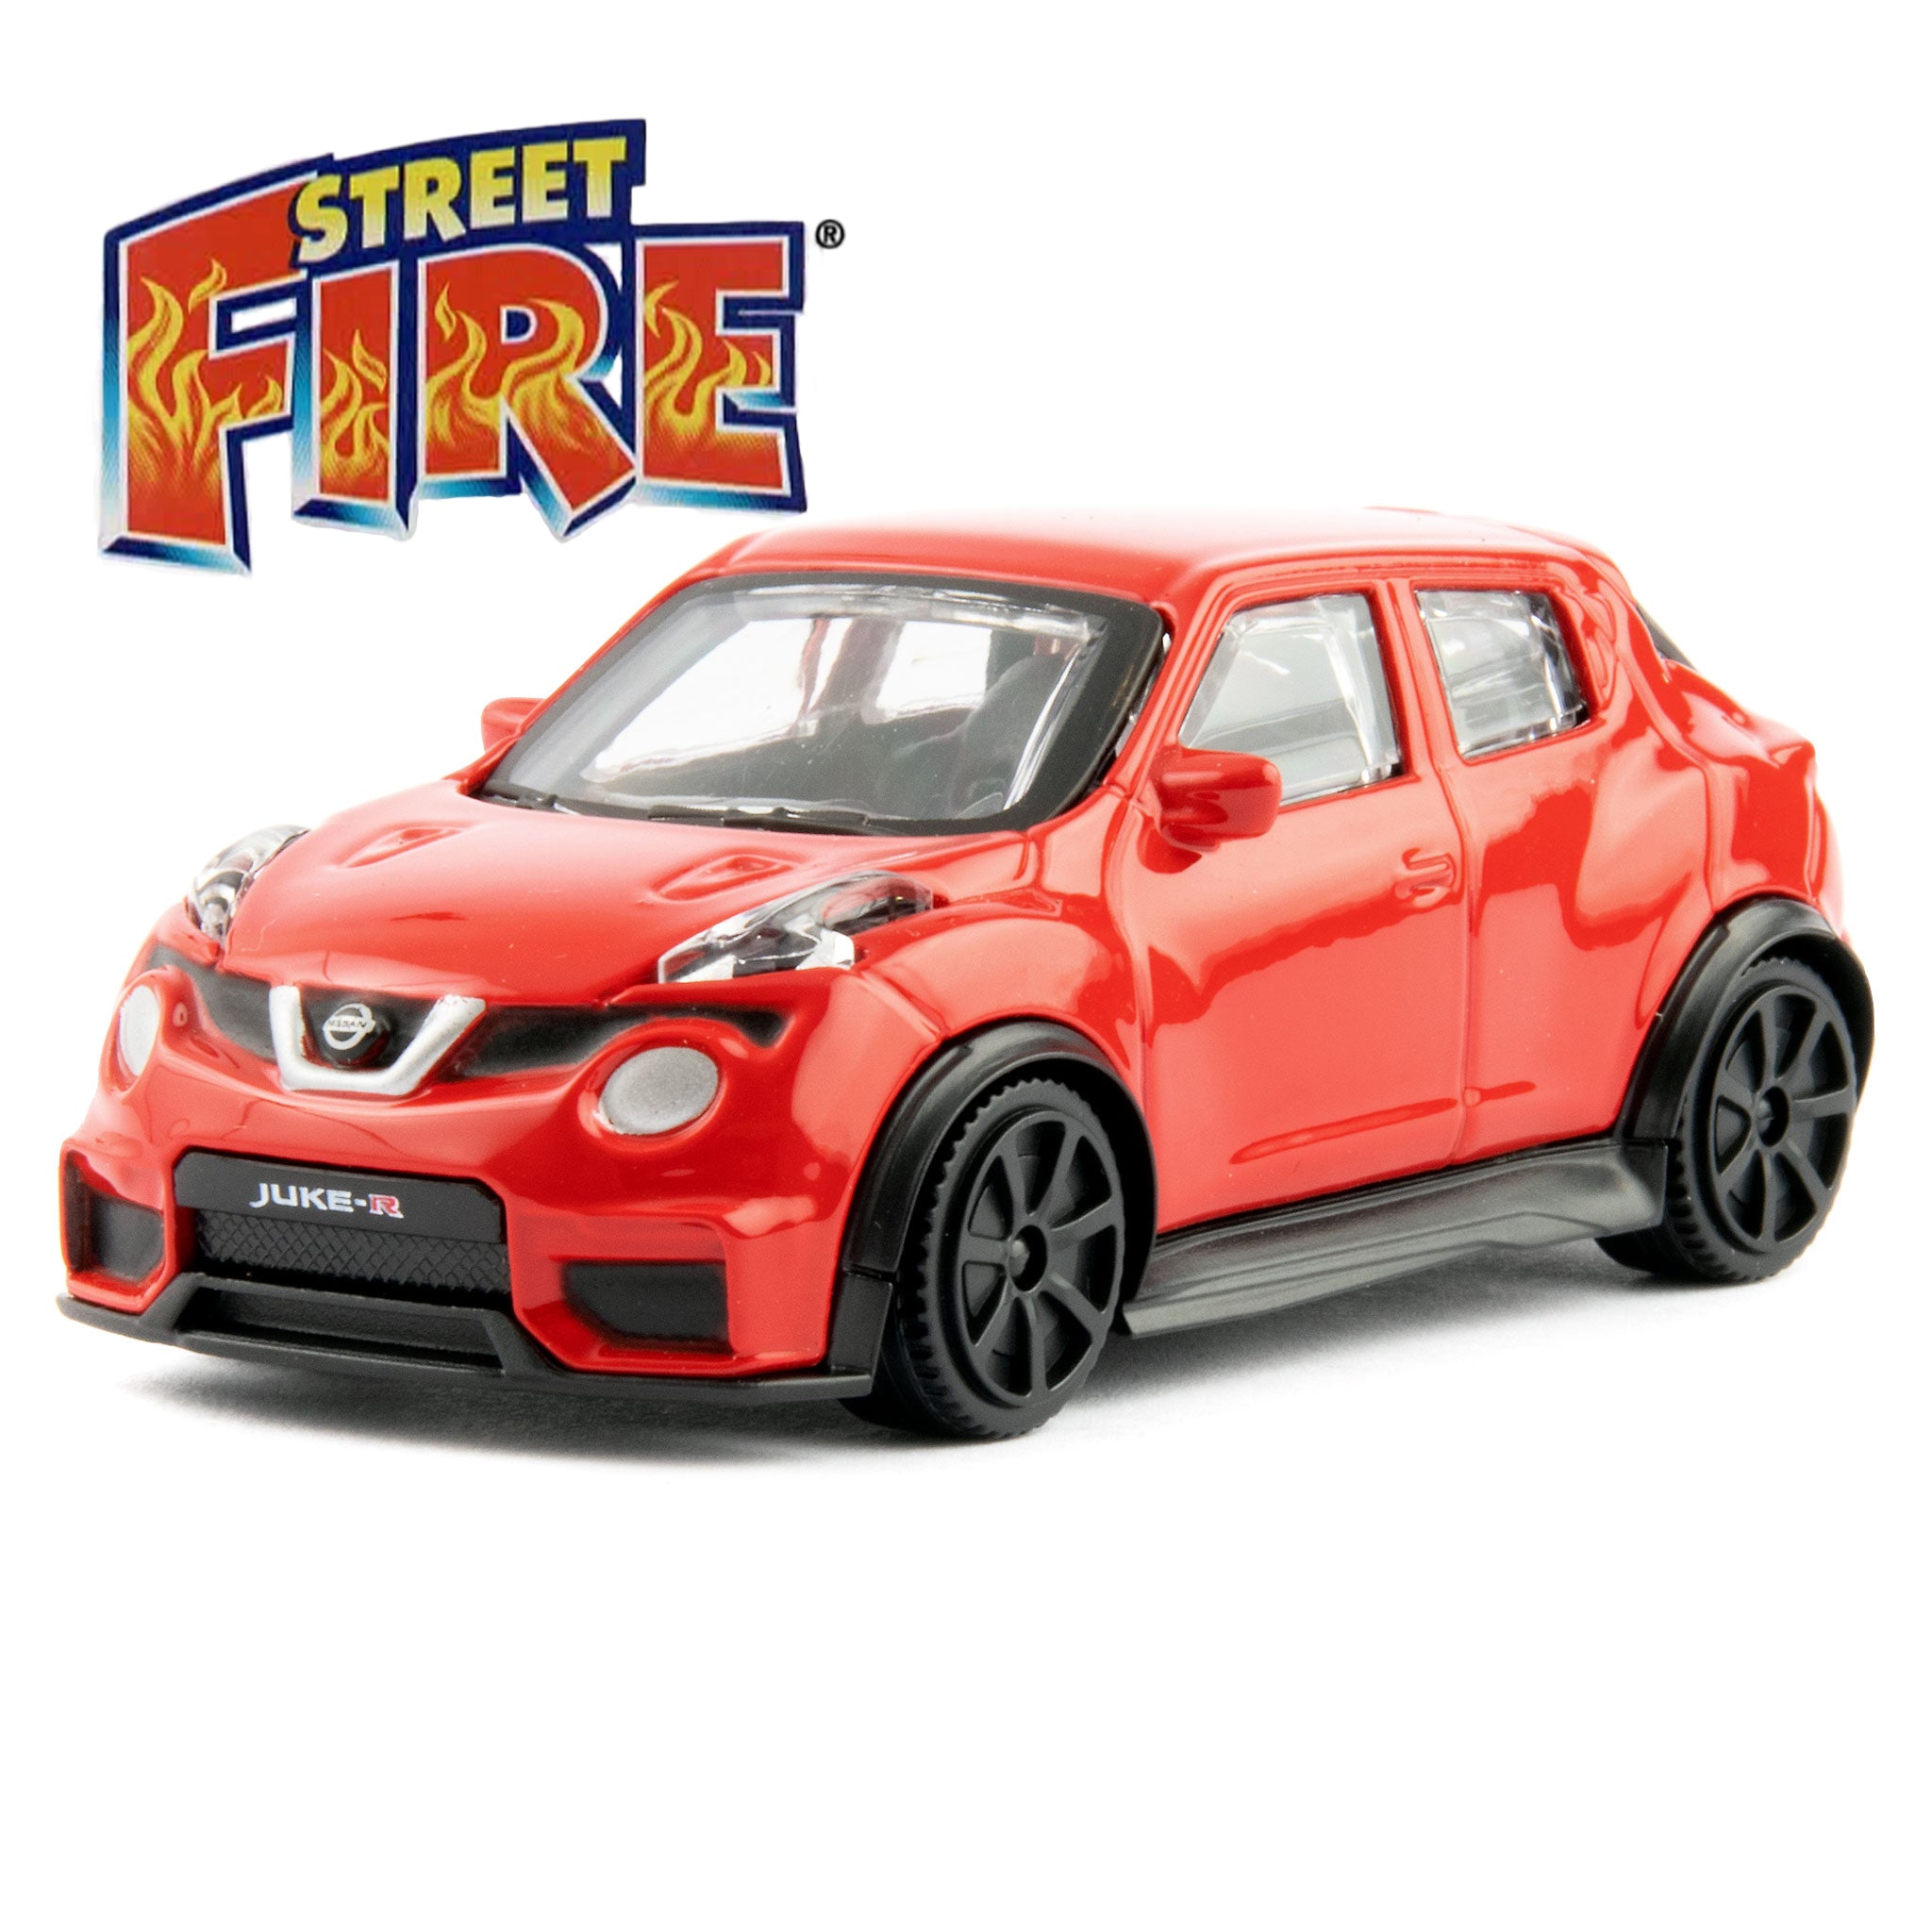 Nissan Juke R Diecast Toy Car red - 1:43 Scale